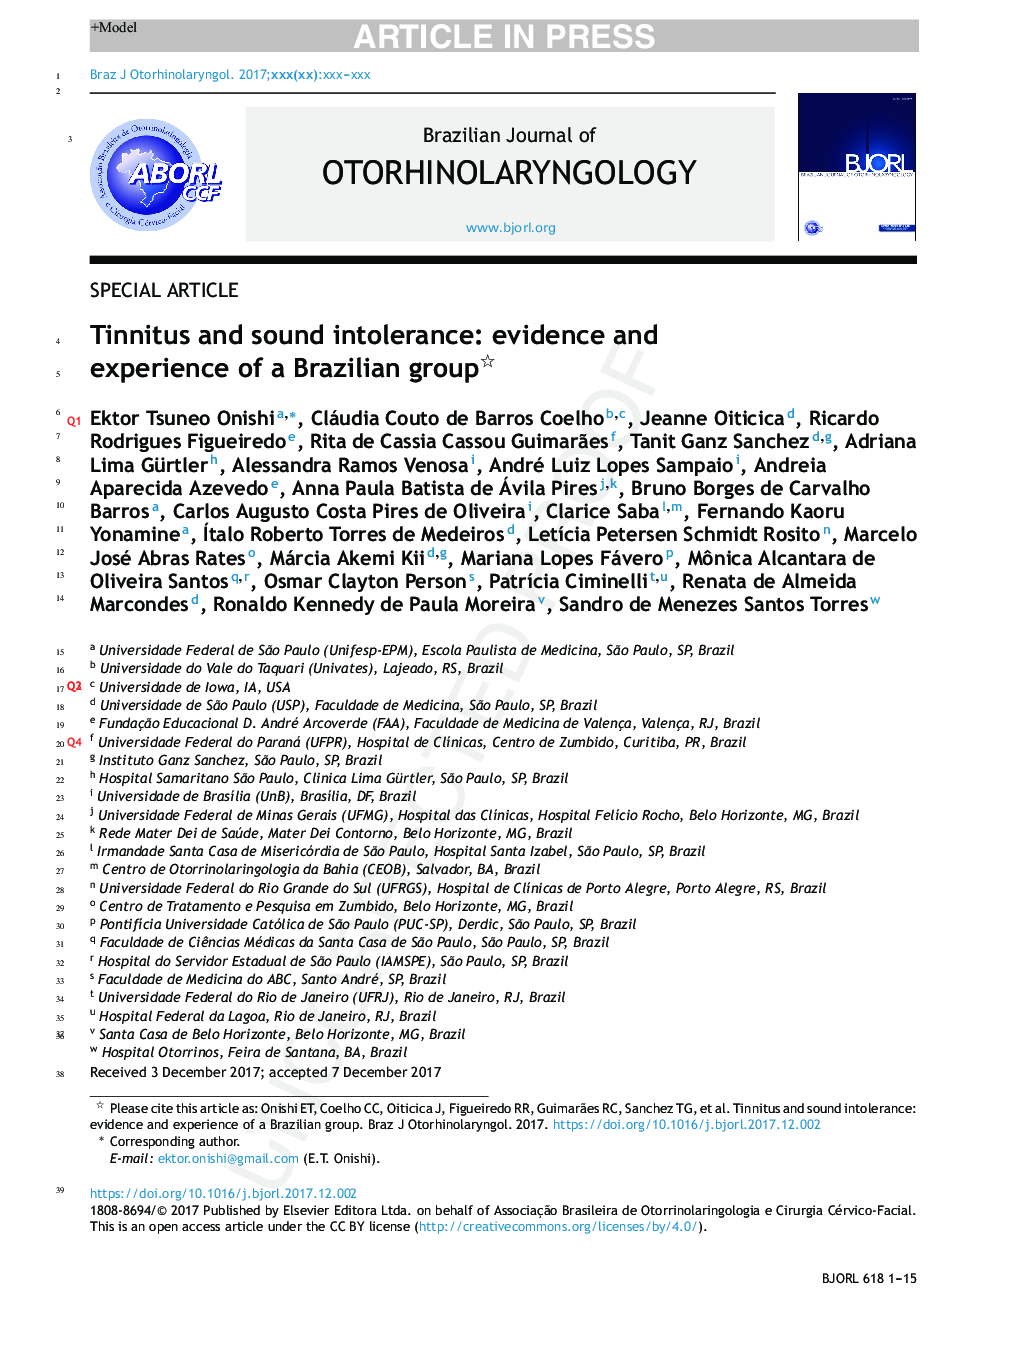 Tinnitus and sound intolerance: evidence and experience of a Brazilian group